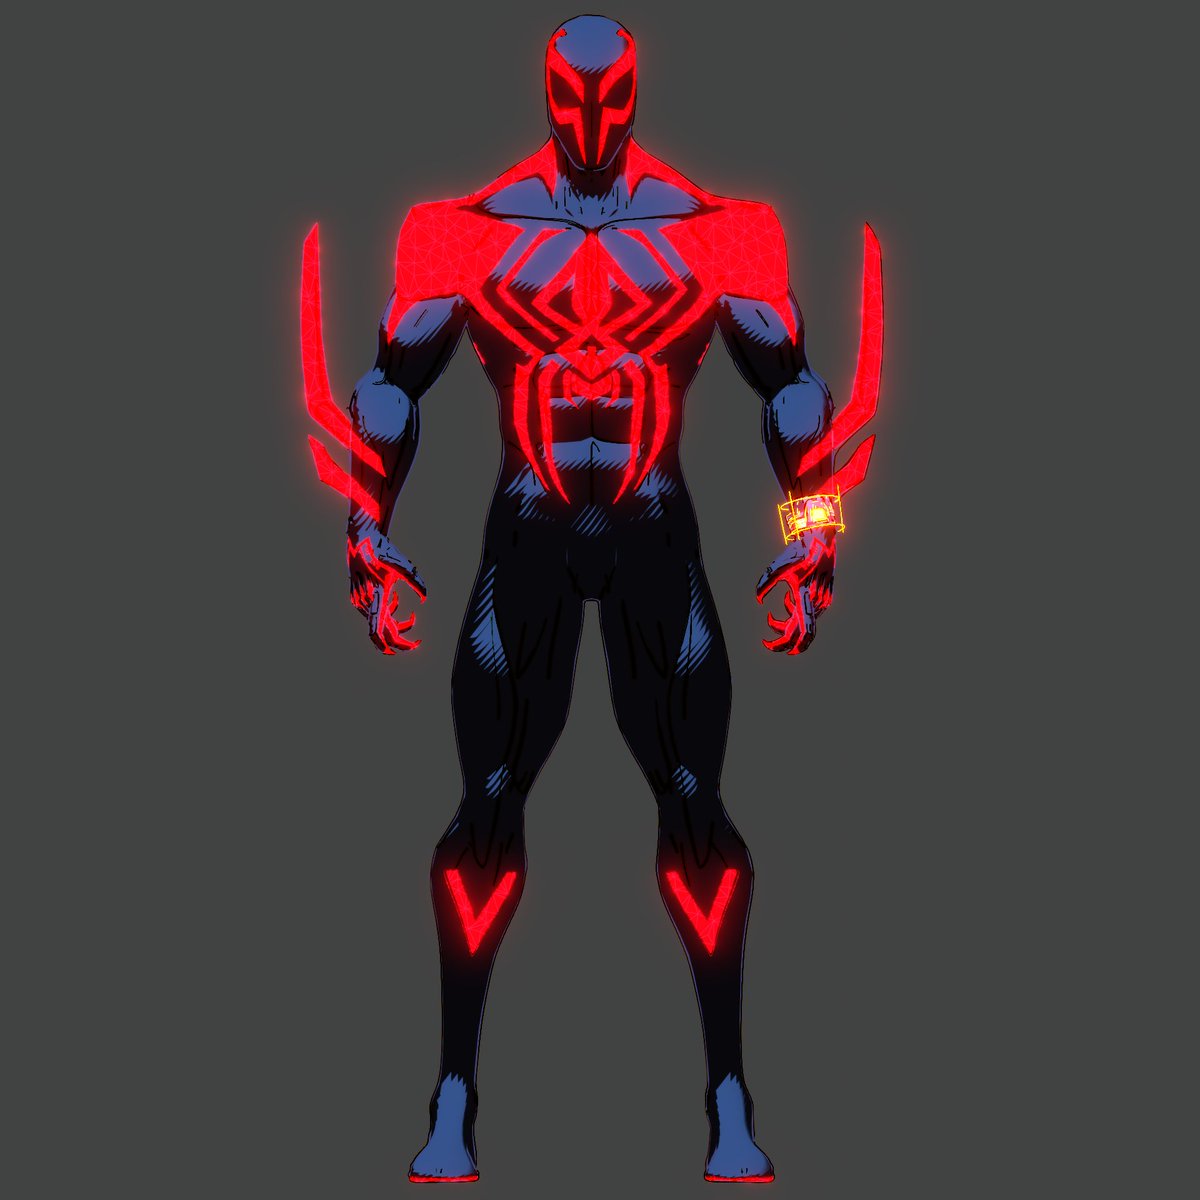 progress on the Miguel update so far, mostly been doing some proportional edits like shoulders n legs + shader edits (once again to match concept art shader more than movie)

I need to remake his claws, watch and logo but we'll get to that eventually

(...i also will do his cape)